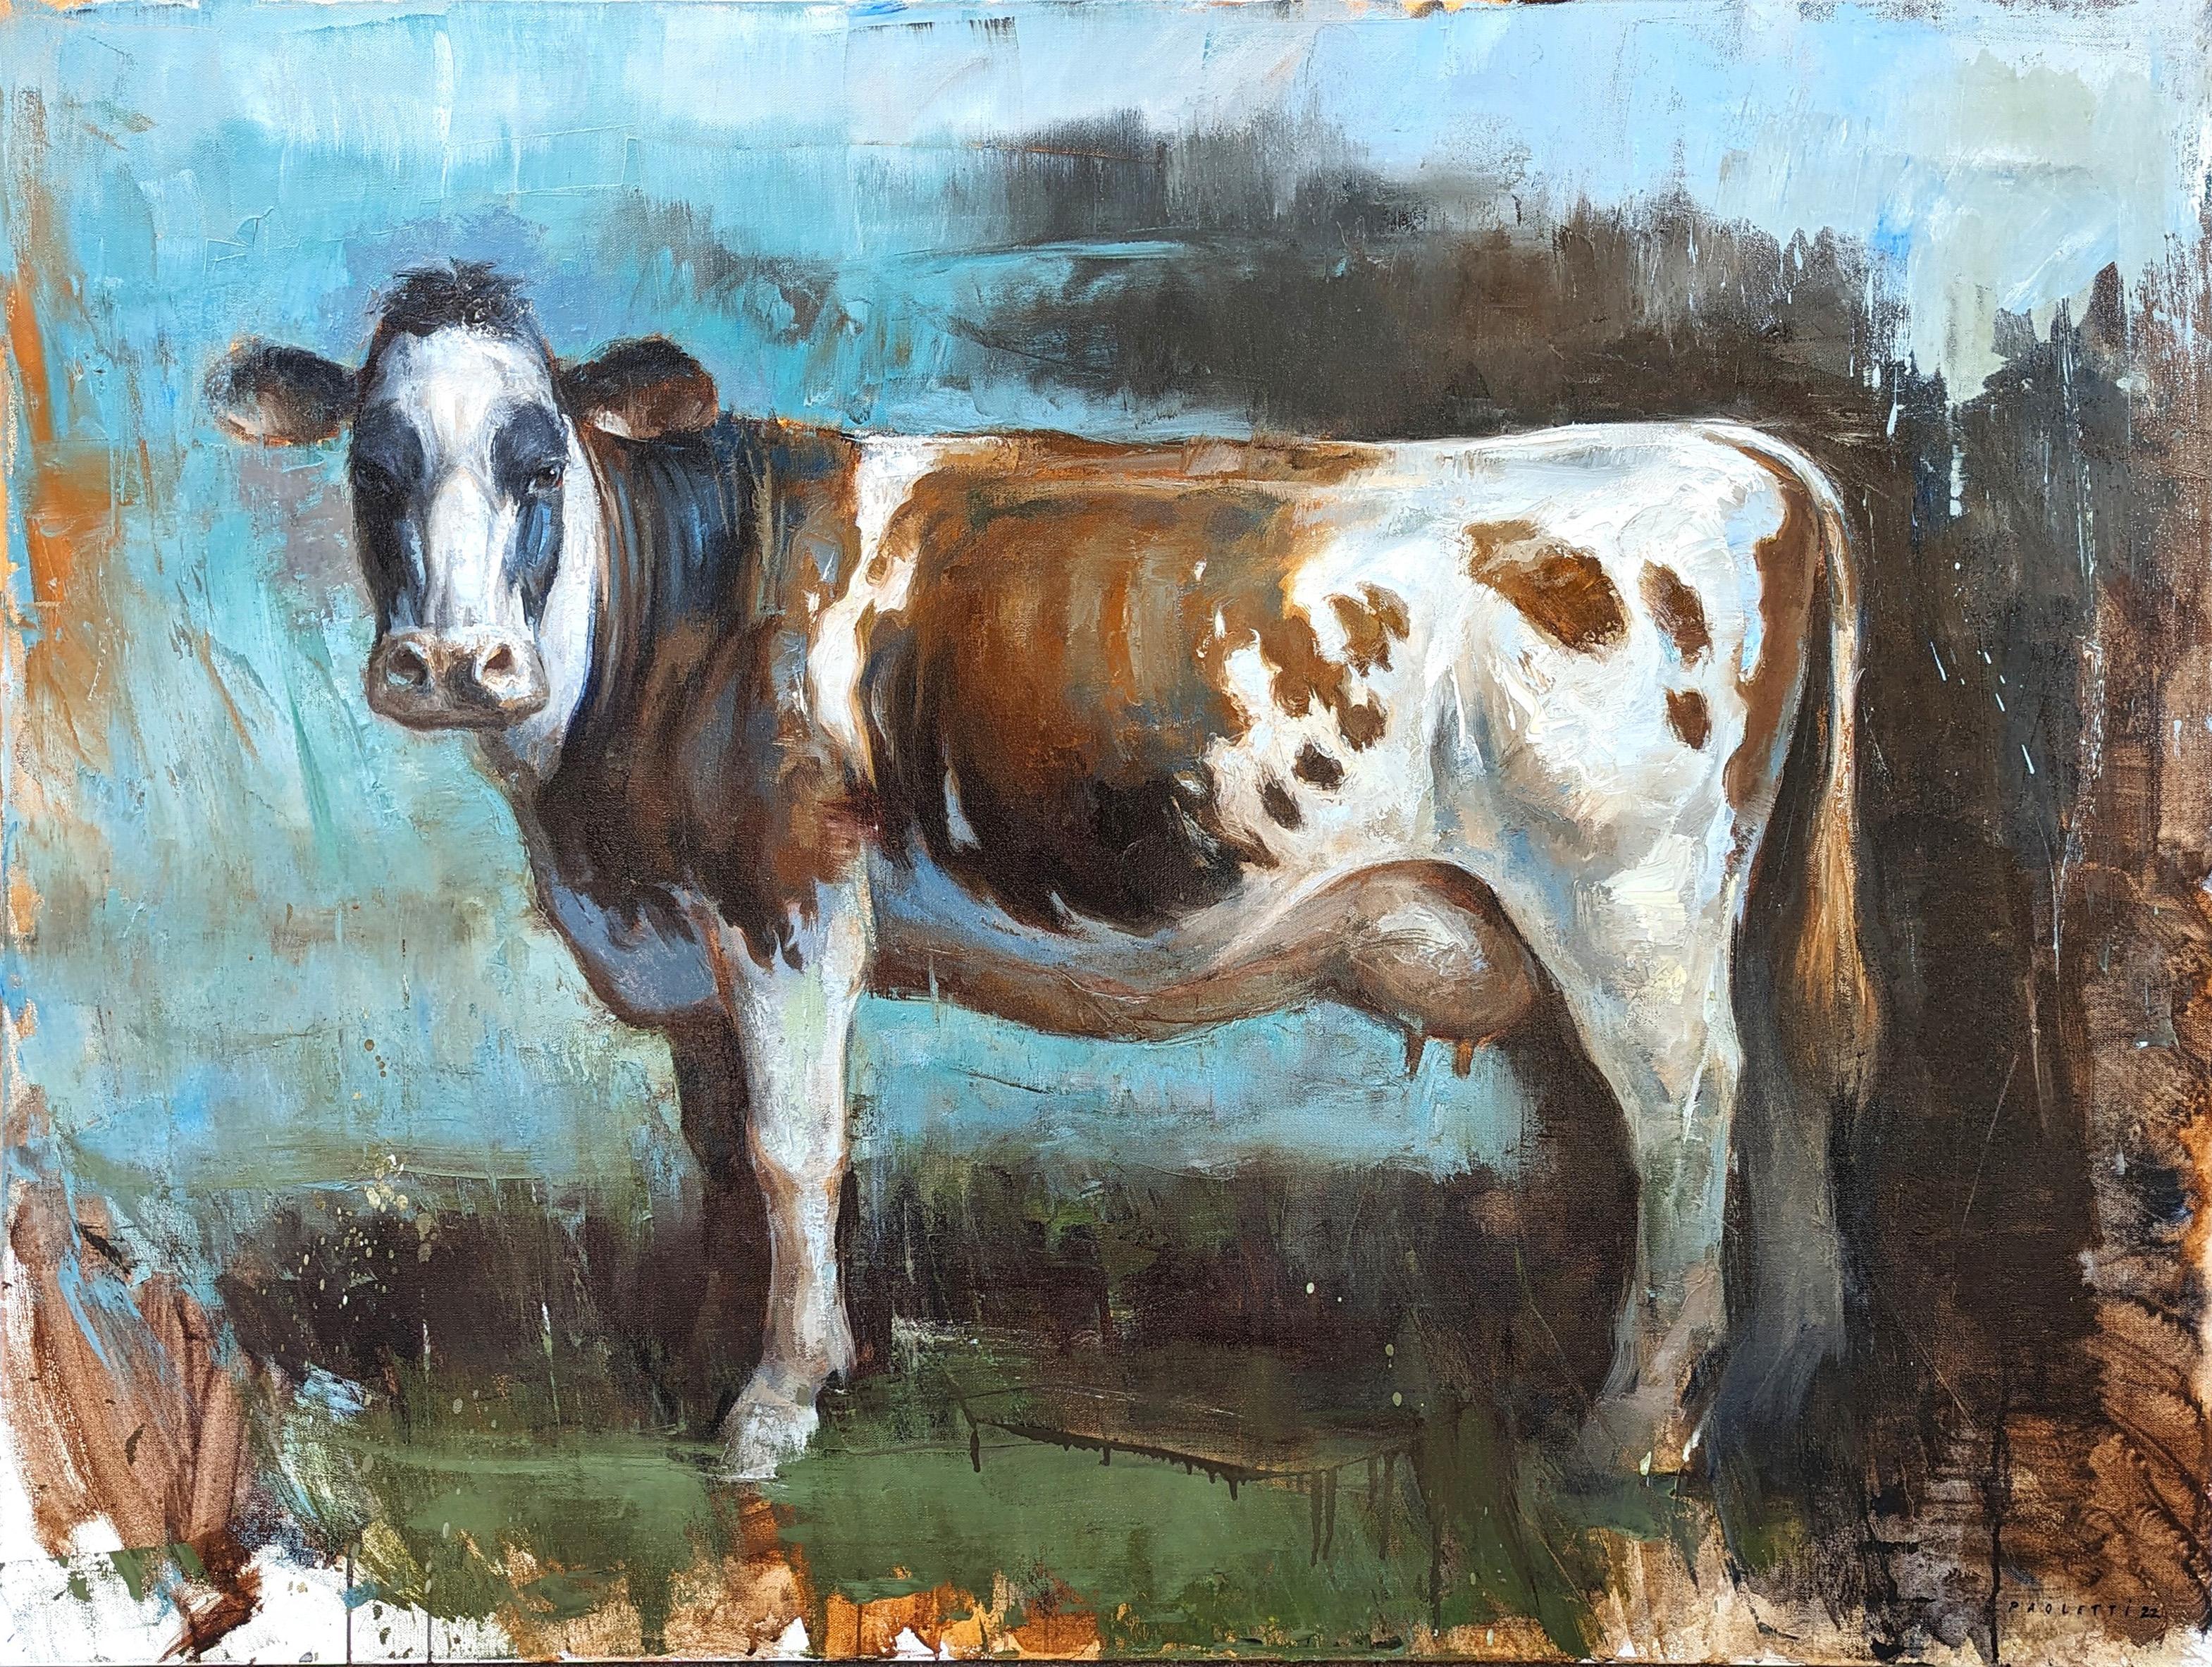 "Spotted" Contemporary Naturalistic Rural Animal Painting einer braunen Kuh